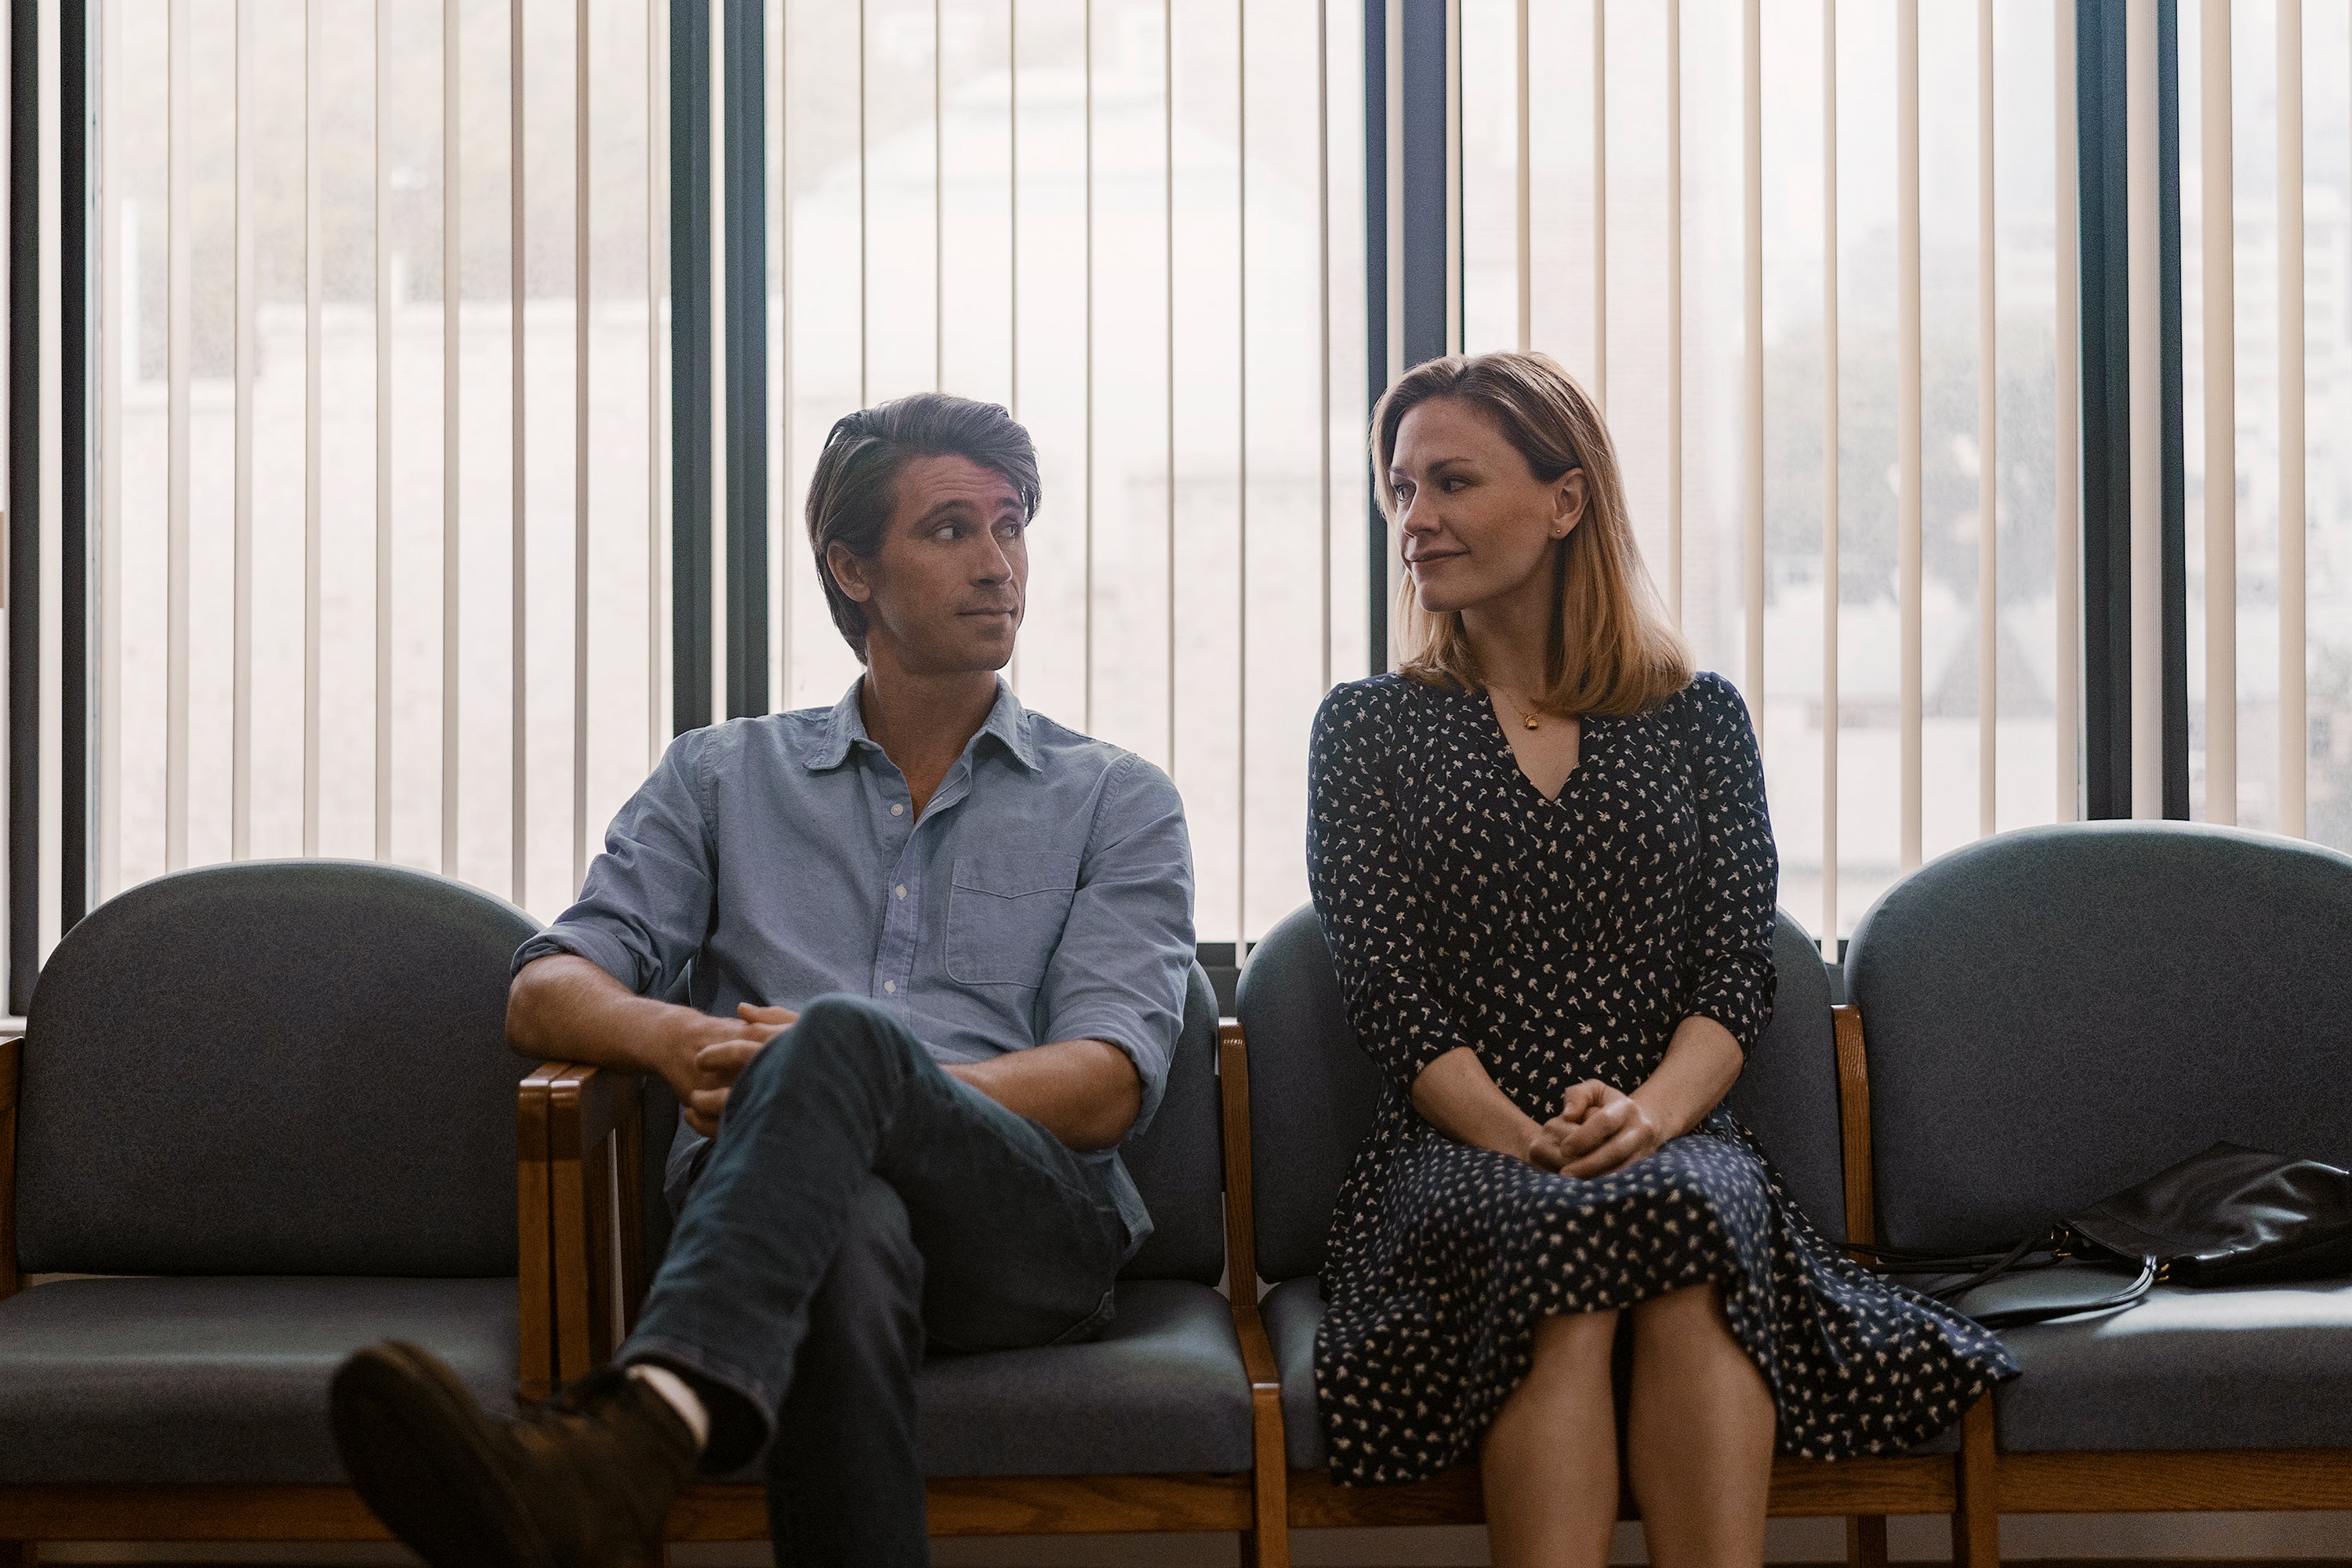 s Modern Love Only Intermittently Offers Romantic Insight in Season  Two, TV/Streaming